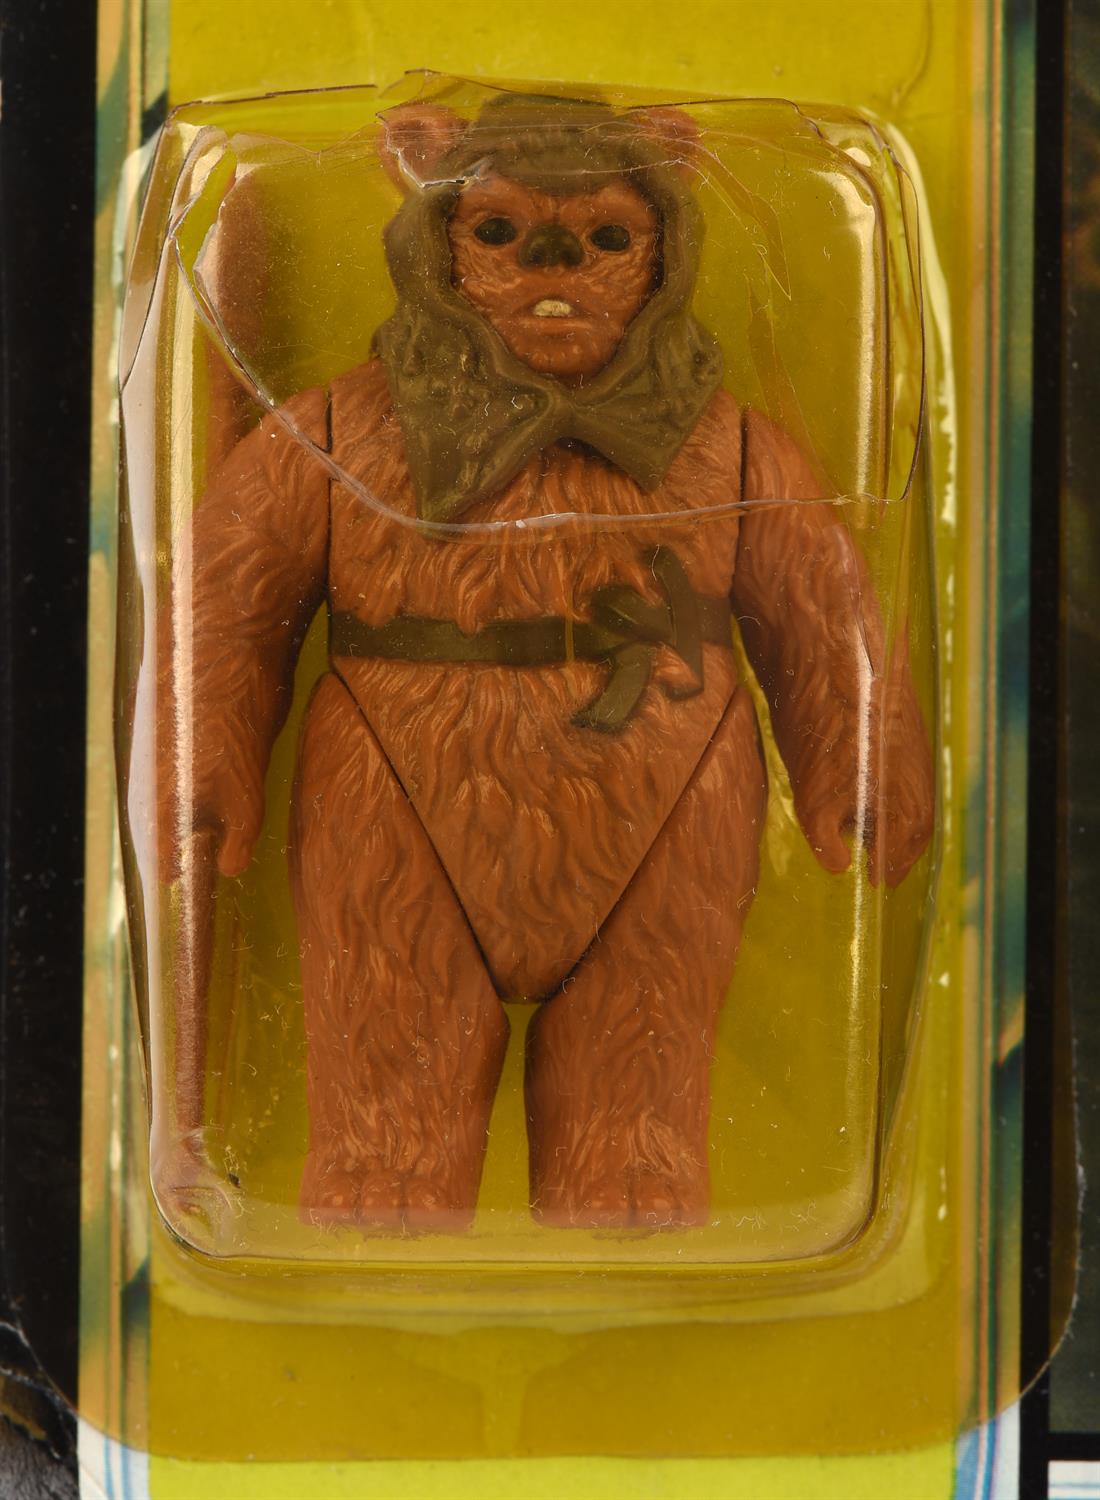 Star Wars The Power of the Force, Special Collectors Coin Romba figure. Made by Kenner. - Image 2 of 4